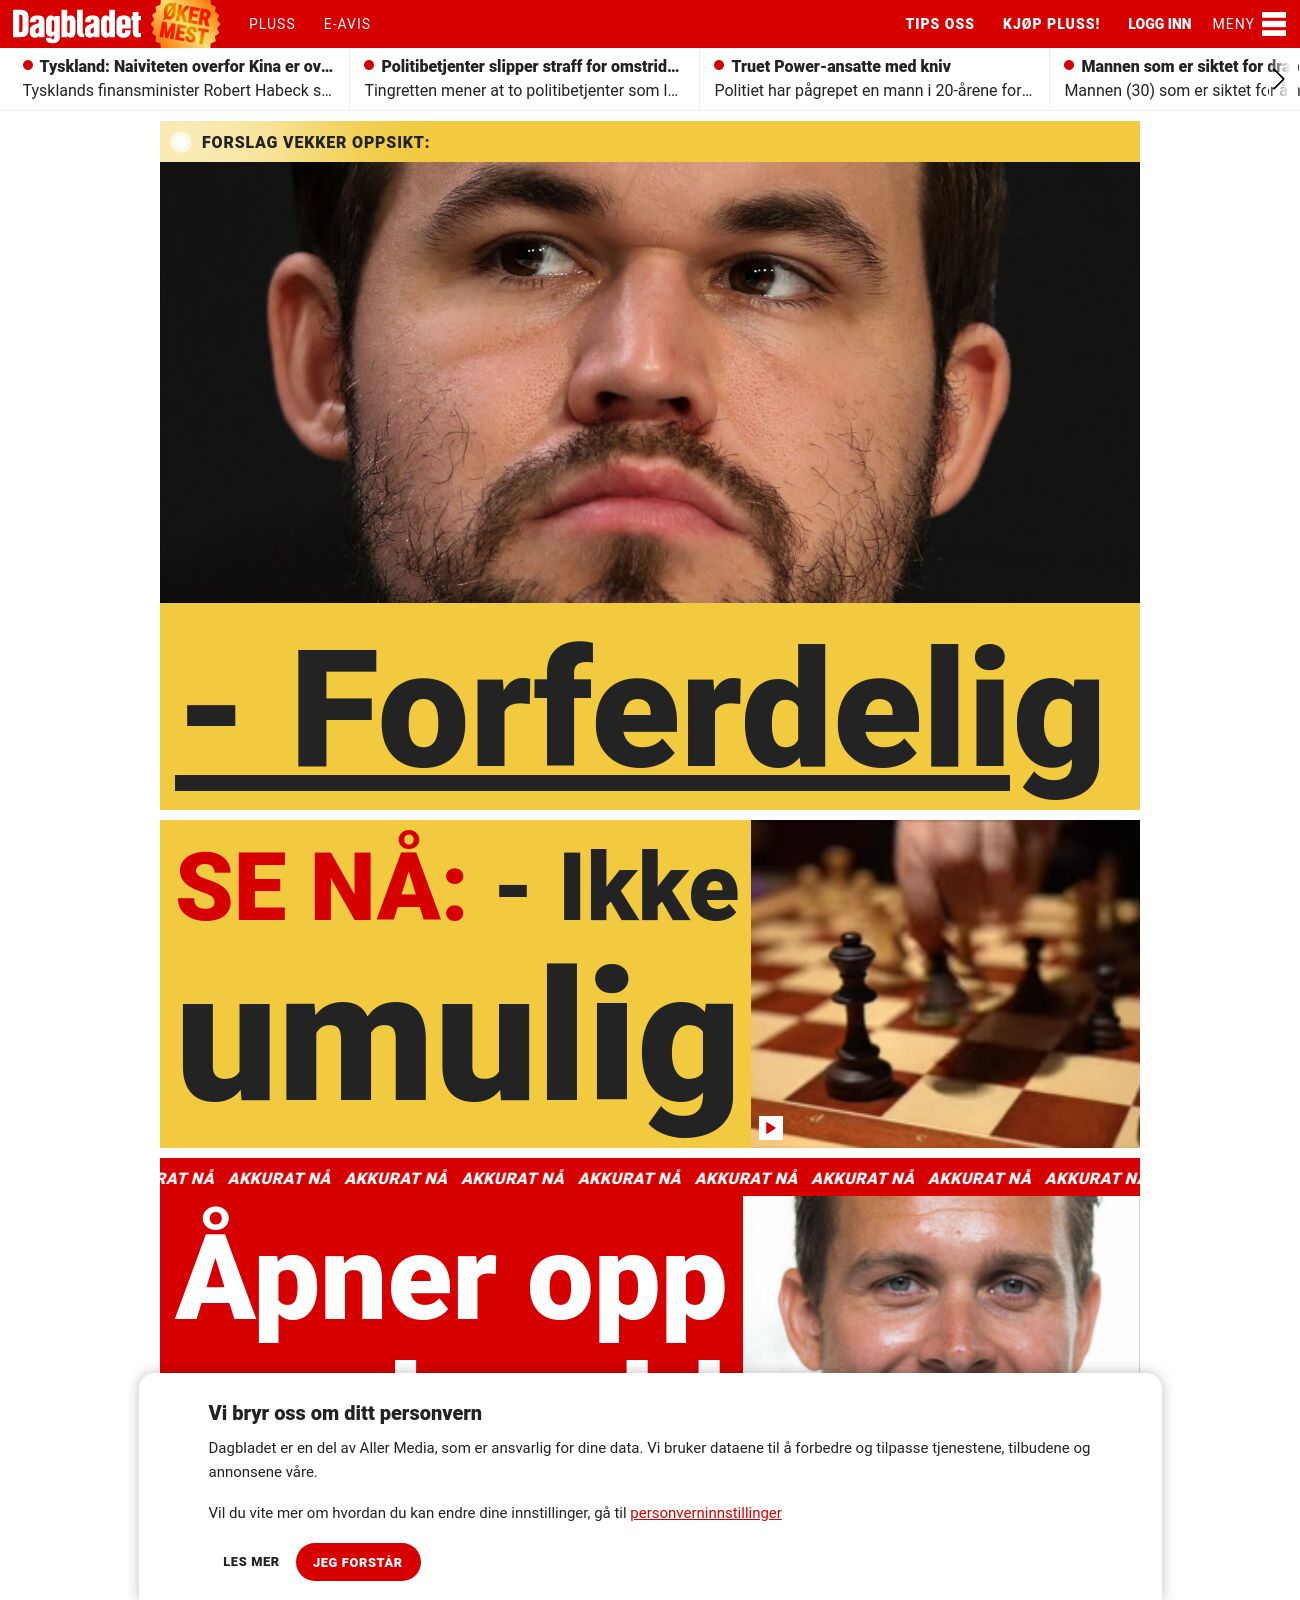 Dagbladet at 2022-09-15 18:10:18+02:00 local time